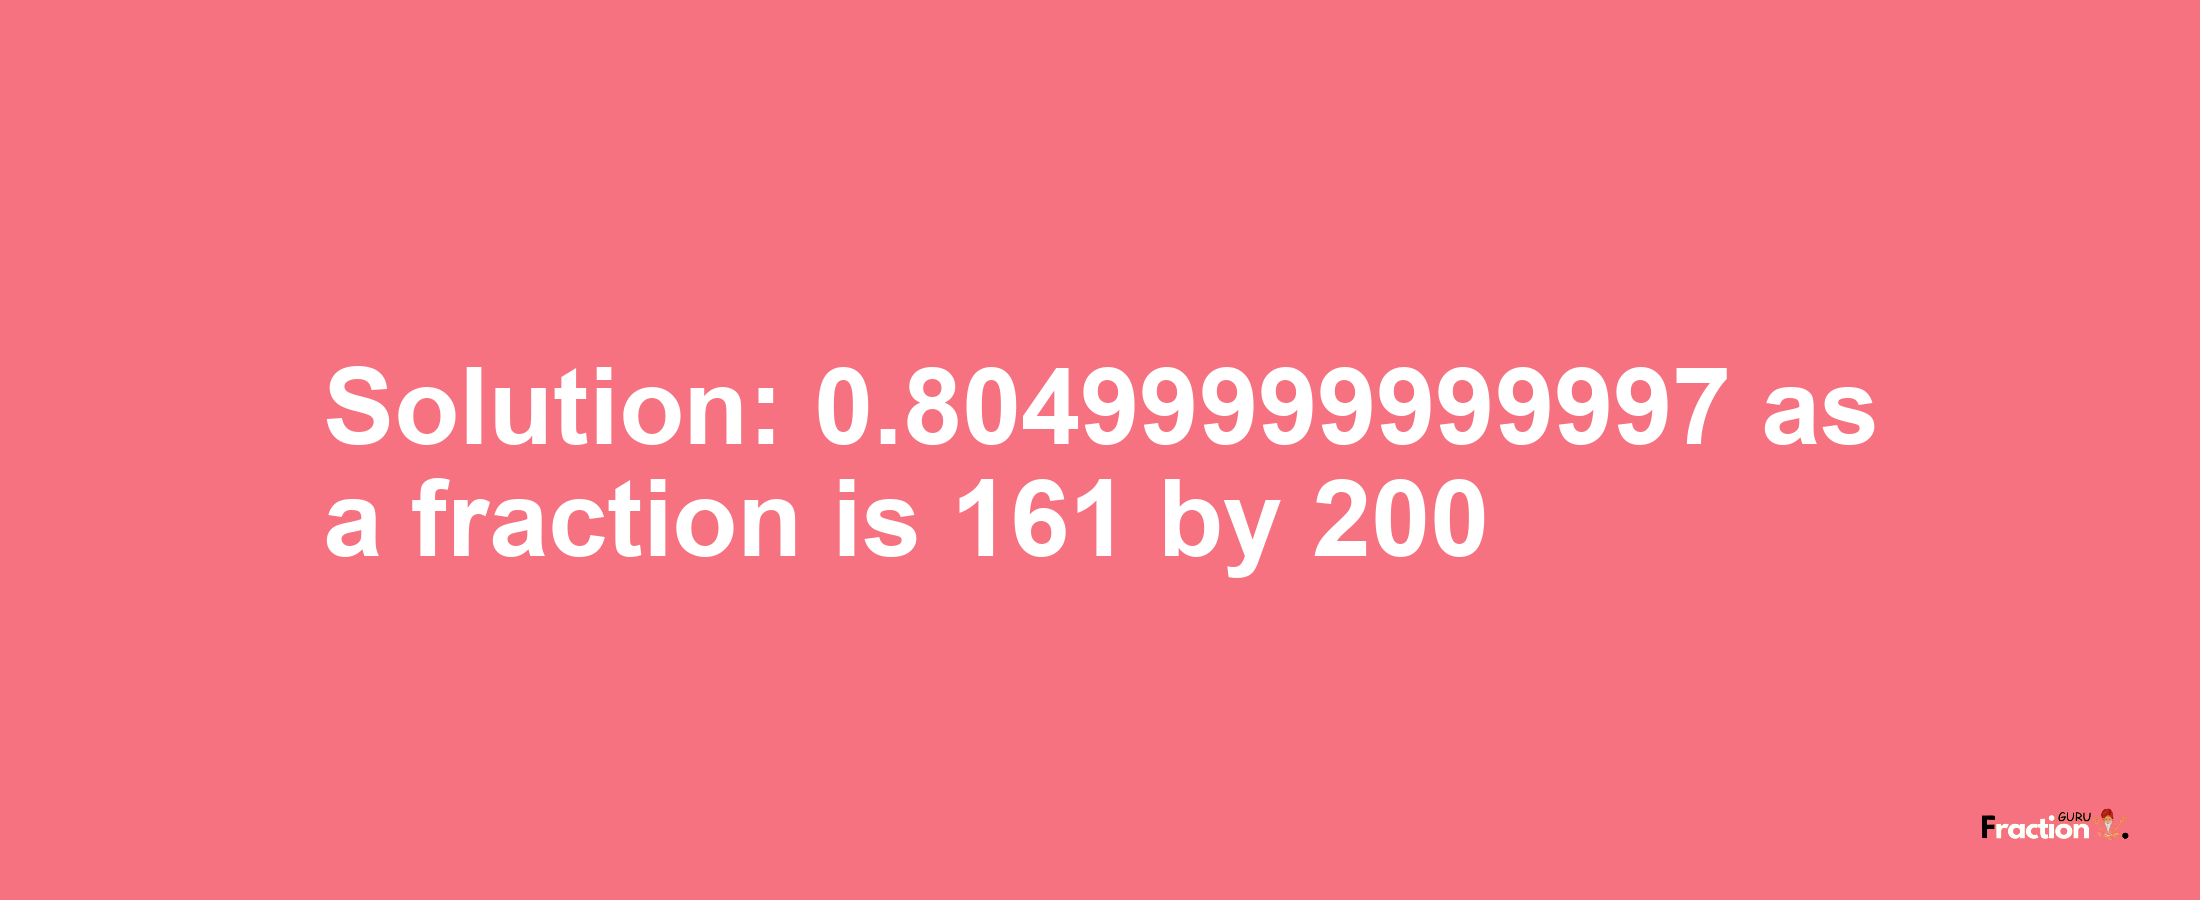 Solution:0.80499999999997 as a fraction is 161/200